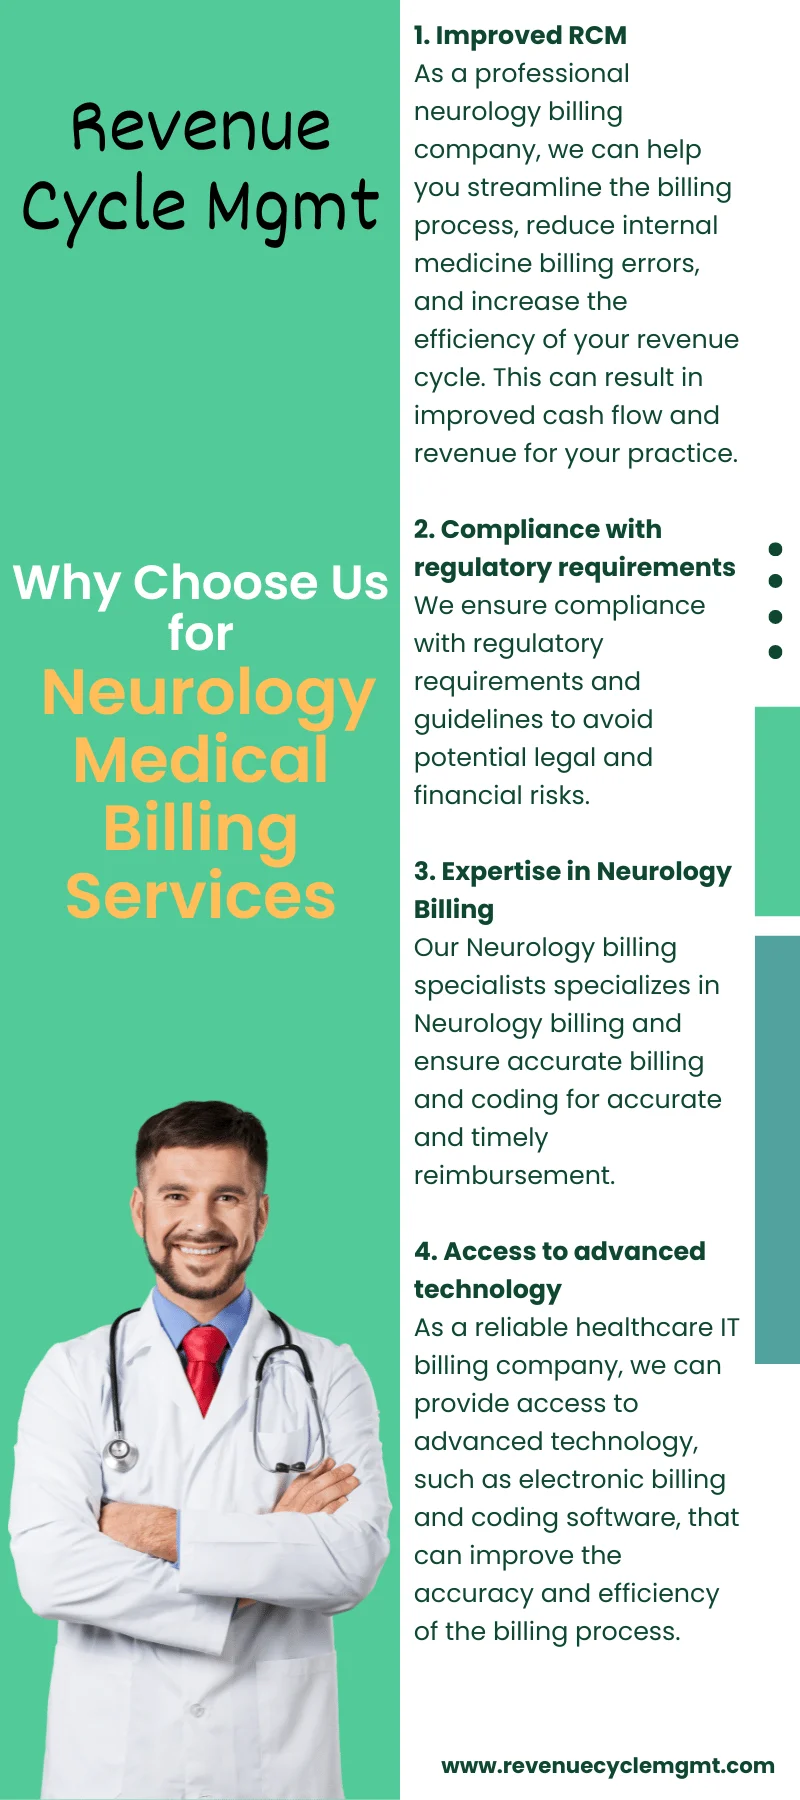 Why Choose Us for Neurology Medical Billing Services